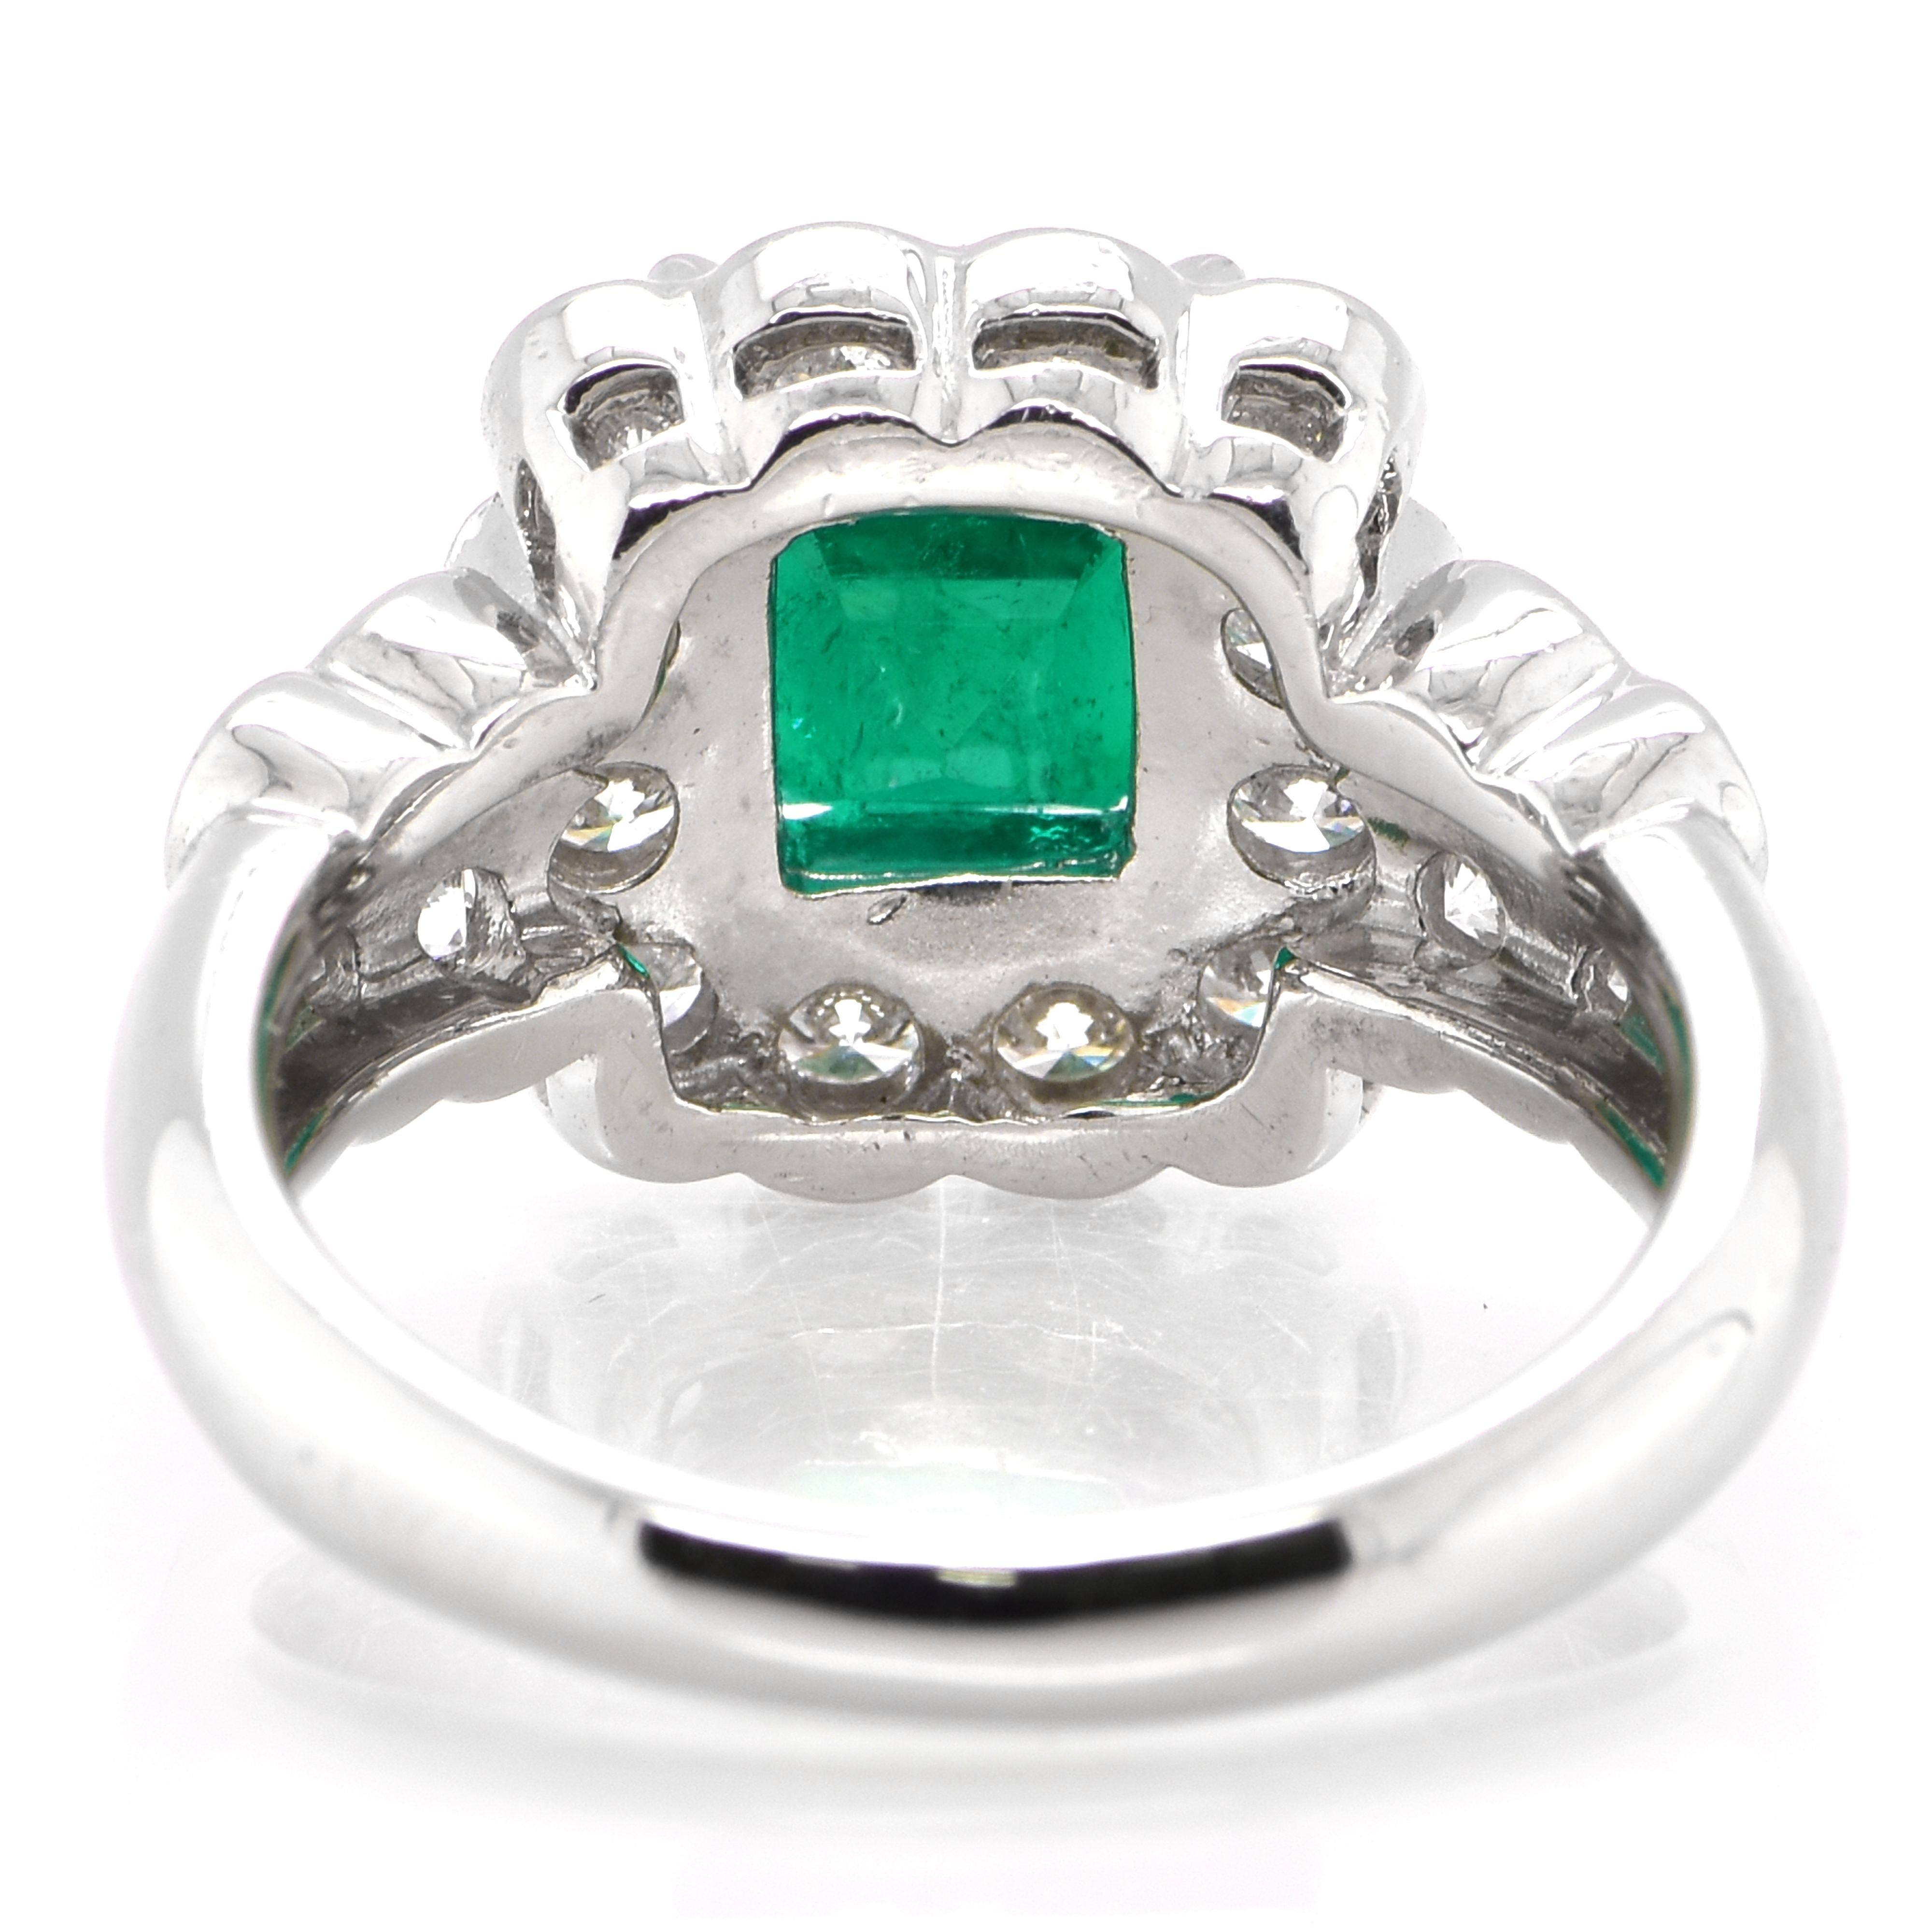 Women's GIA Certified 1.87 Carat, Colombian, Muzo Green Emerald Ring set in Platinum For Sale